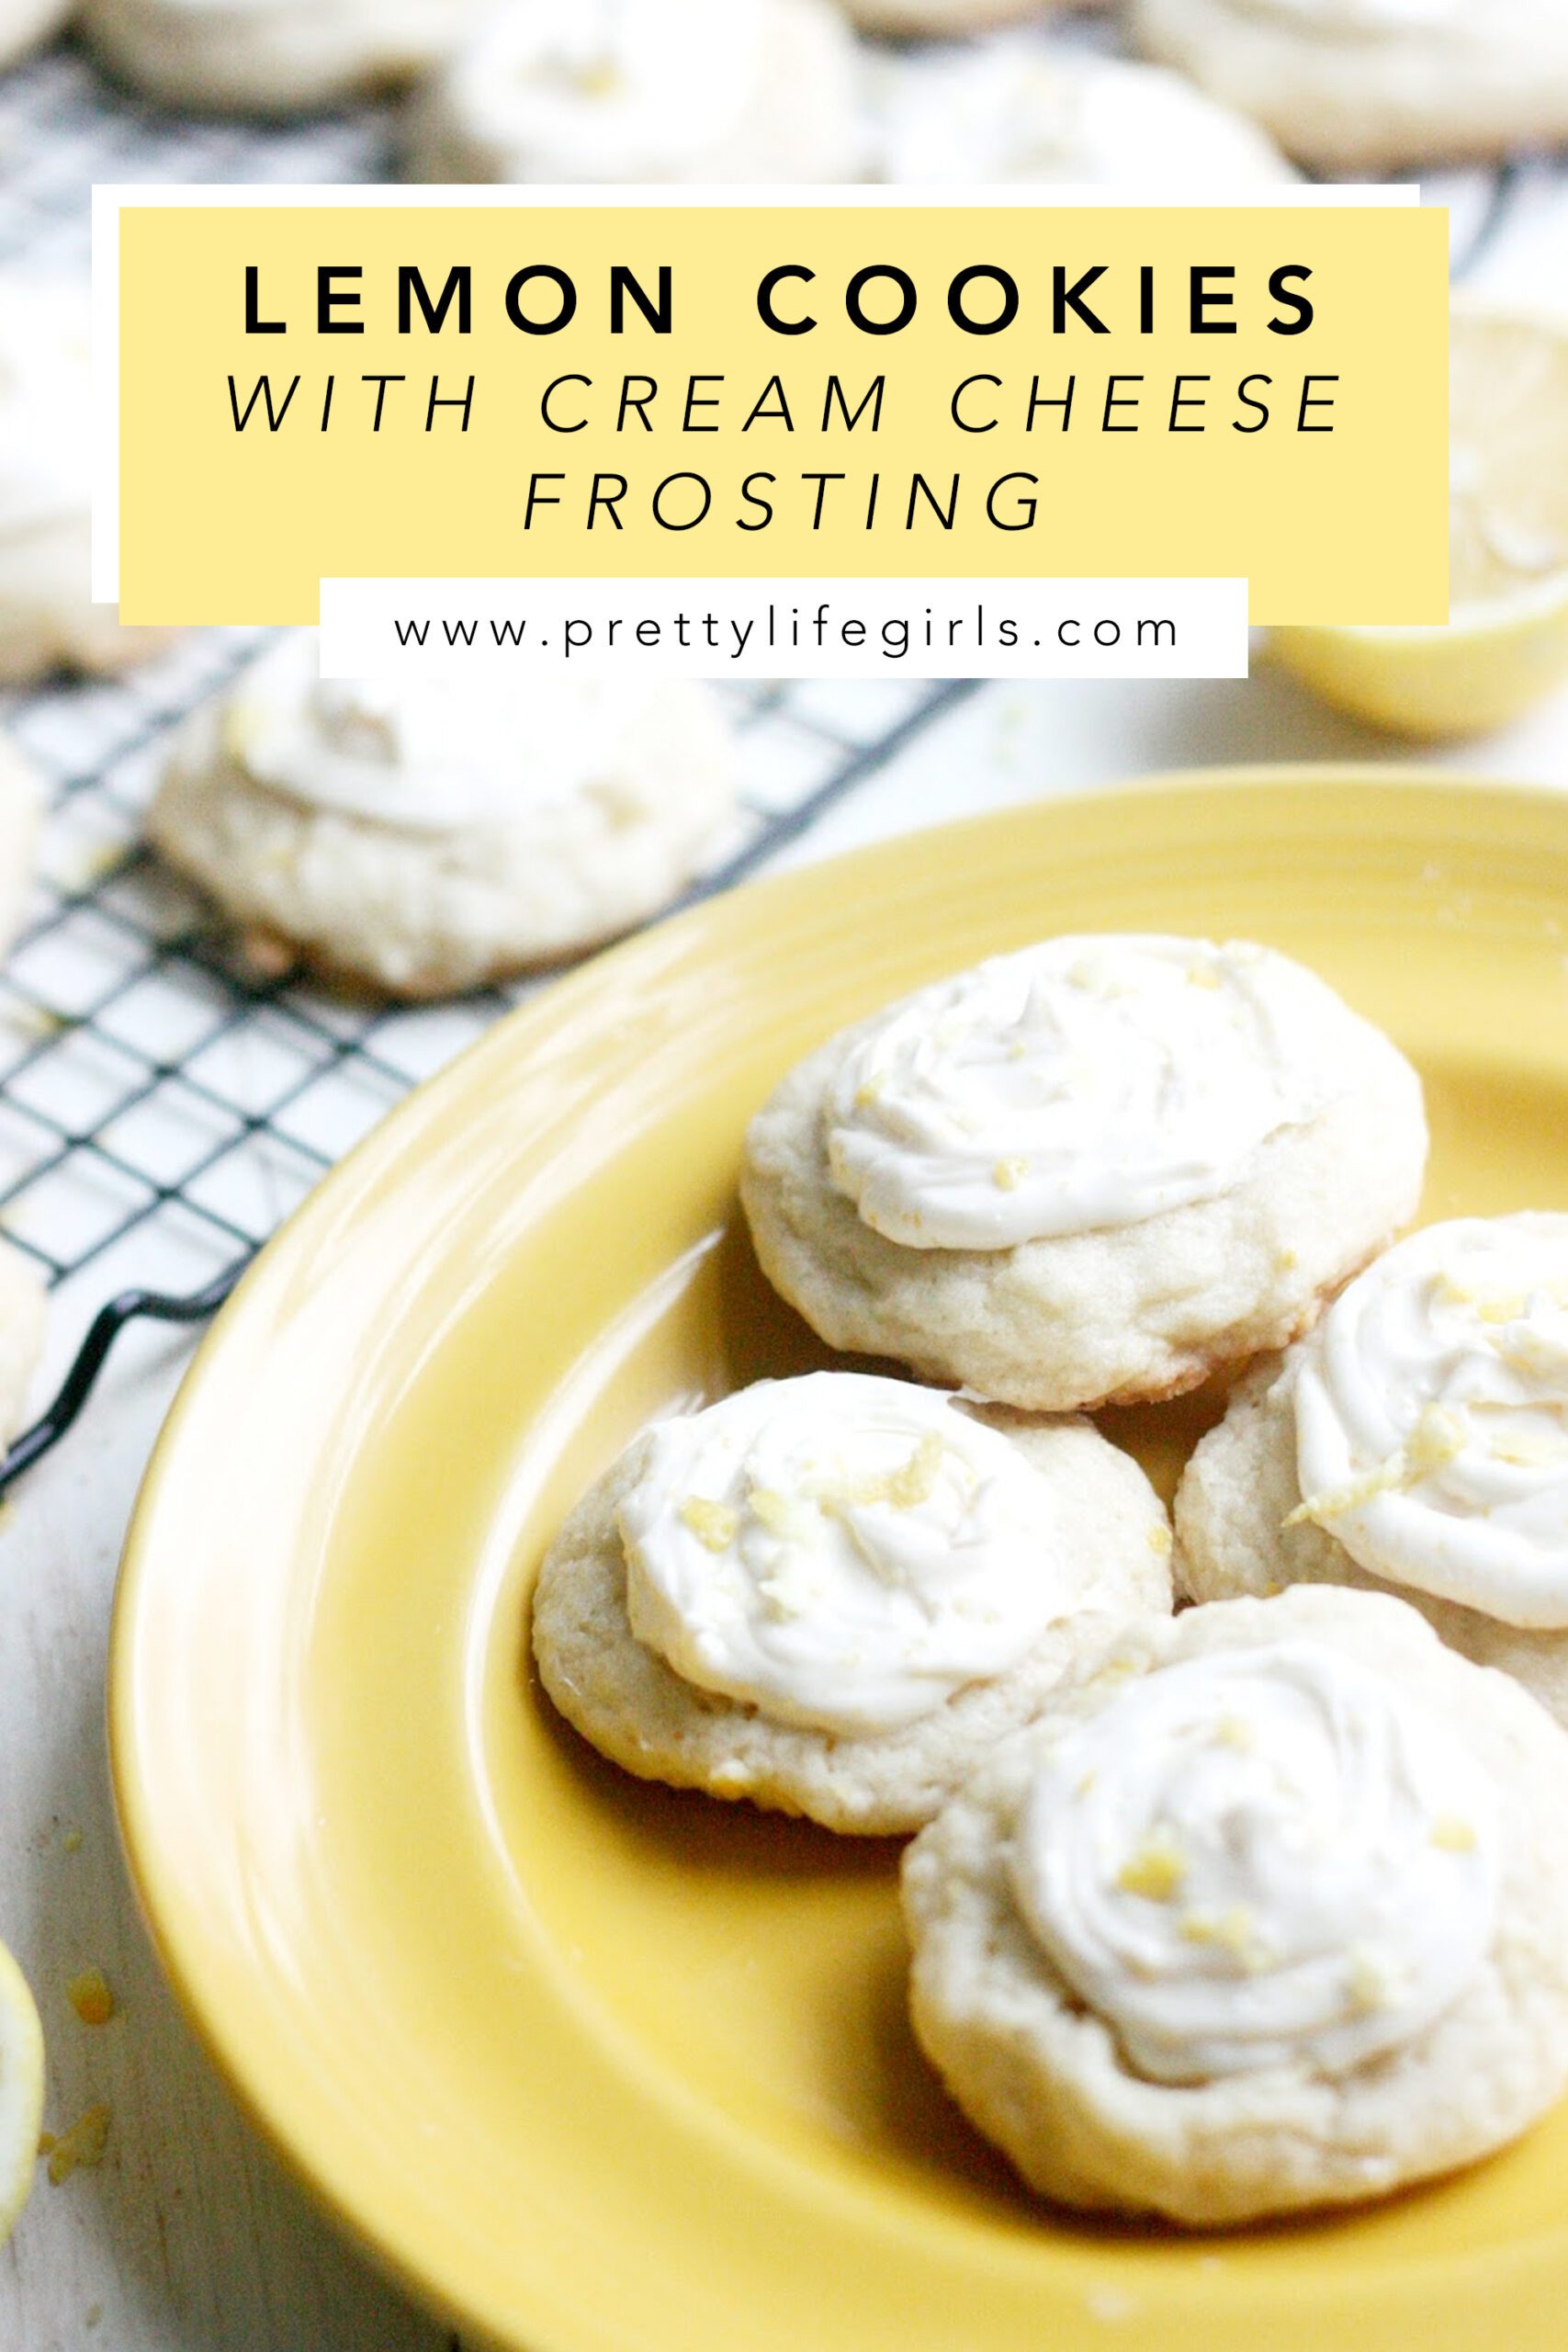 Lemon Cream Cheese Cookies + a recipe featured by Top US Craft Blog + The Pretty Life Girls